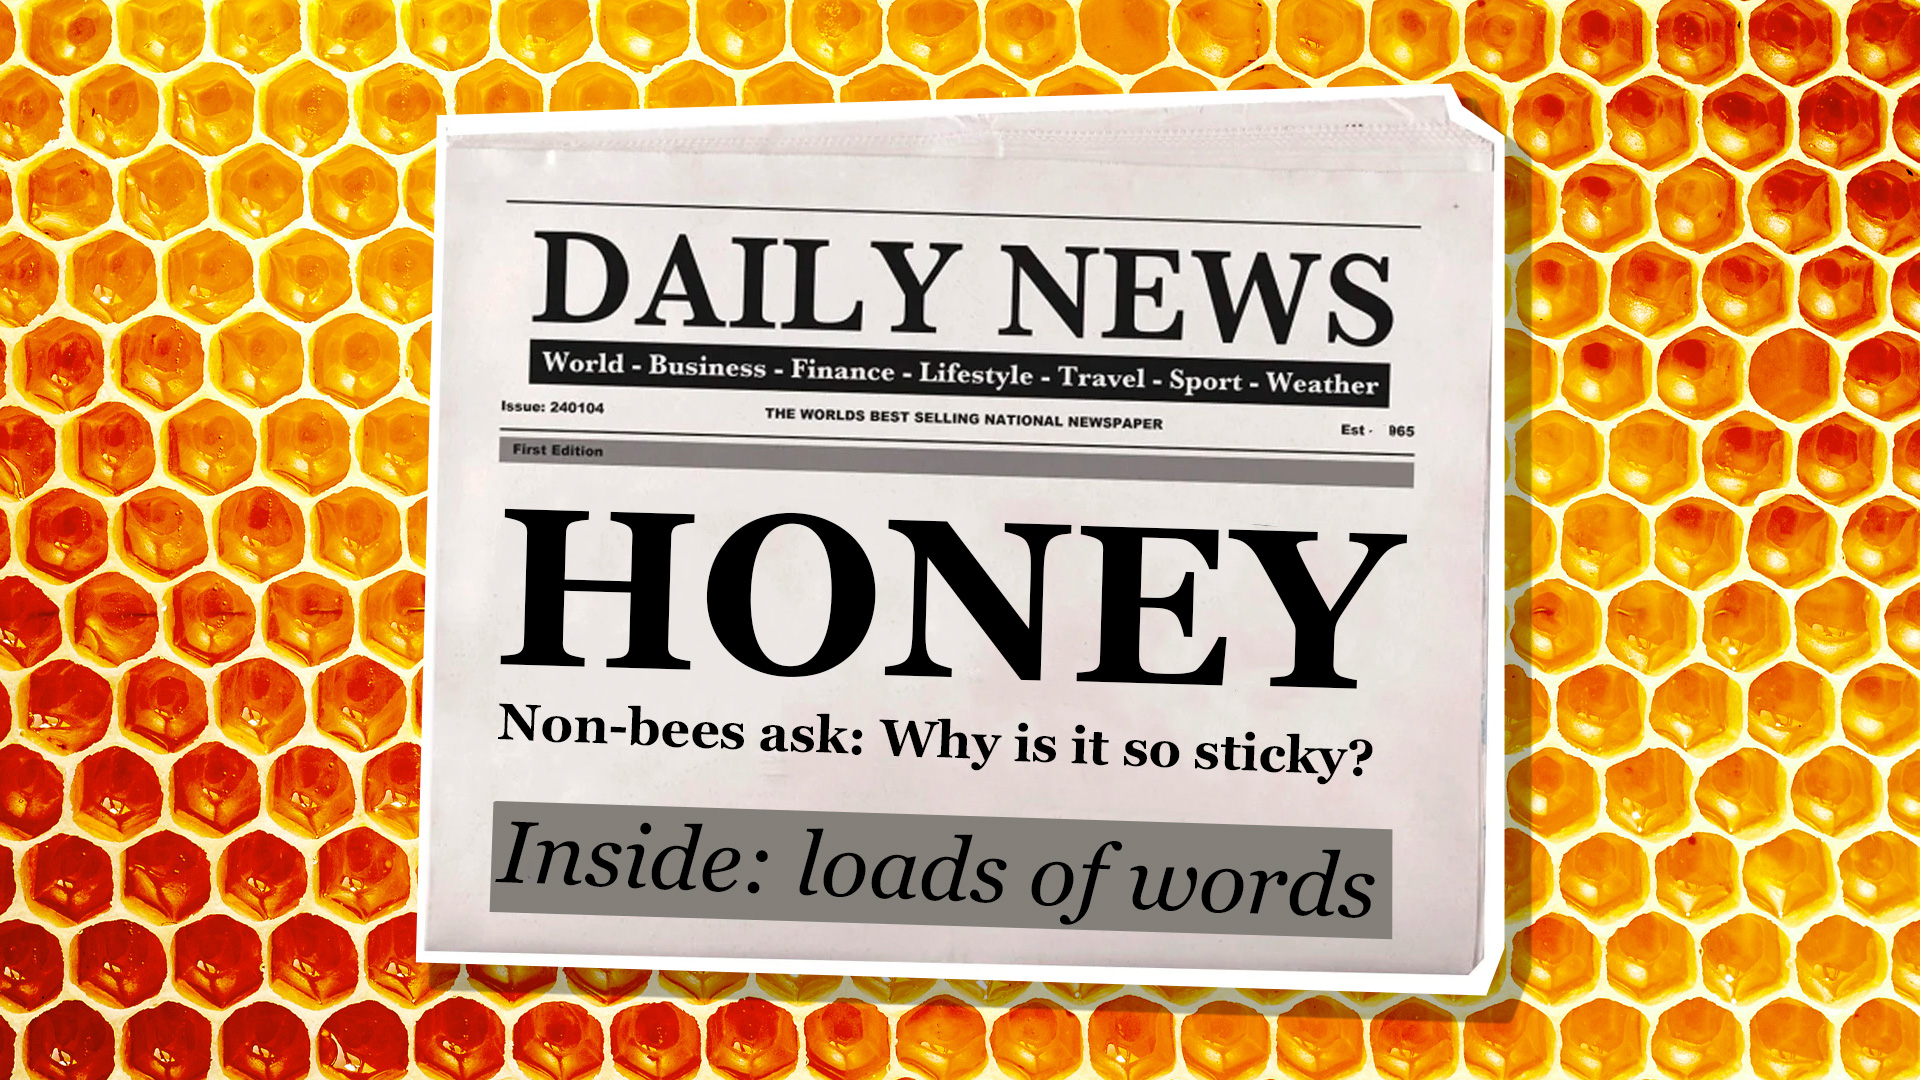 A bee-themed newspaper